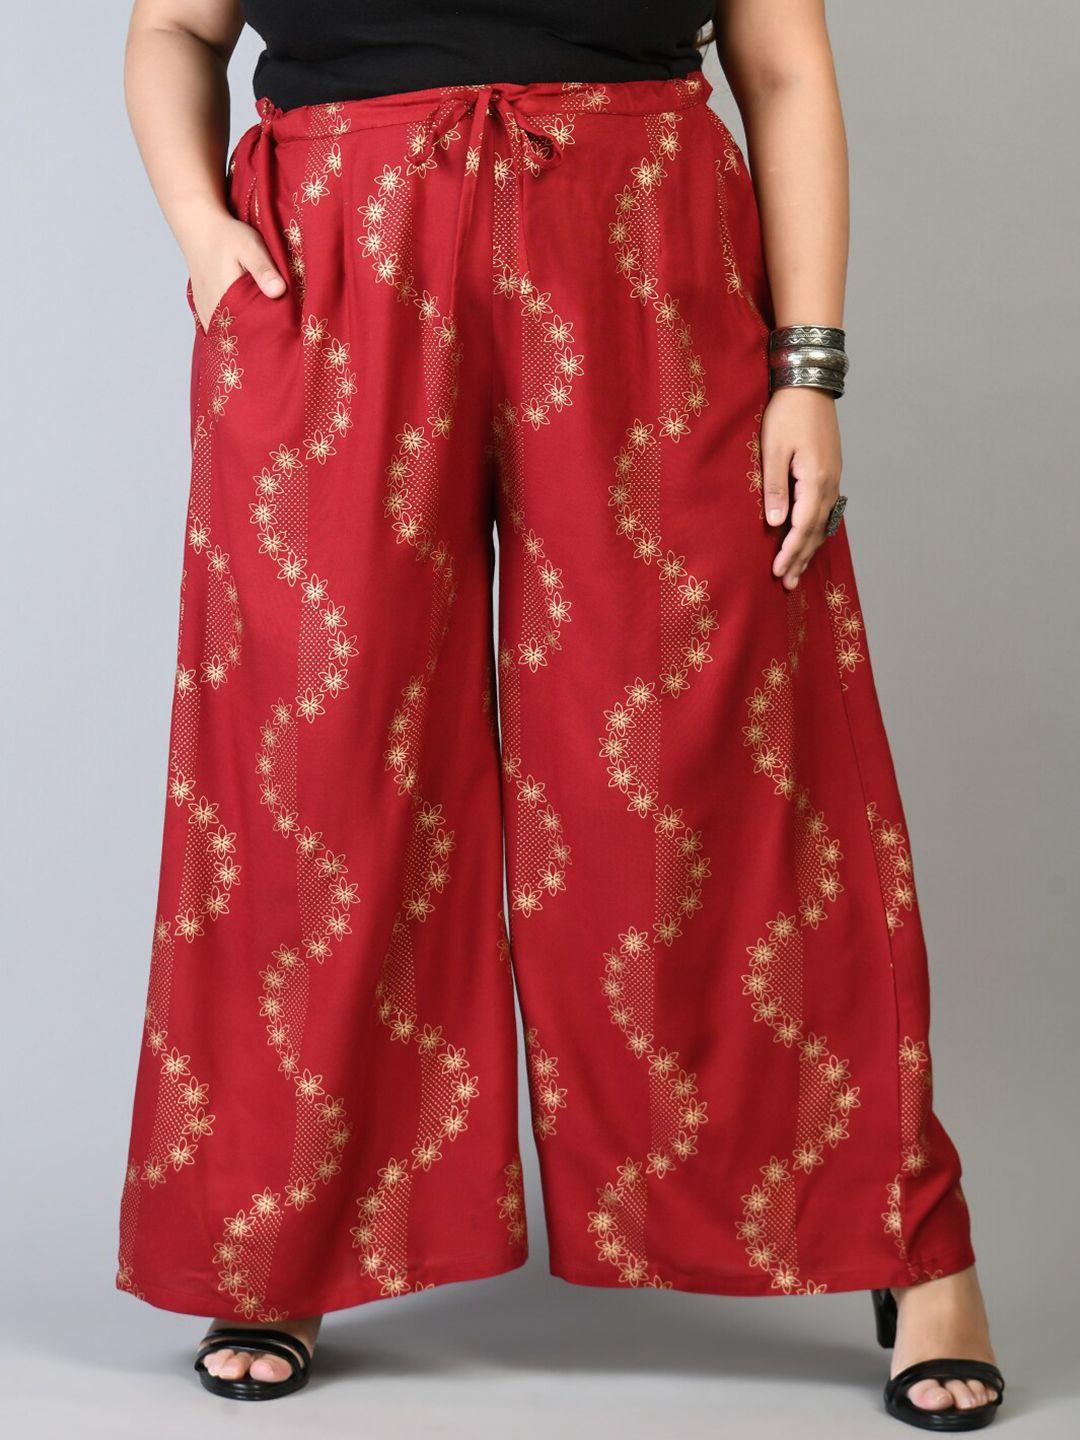 prettyplus by desinoor.com women plus size red & cream-coloured floral printed palazzos